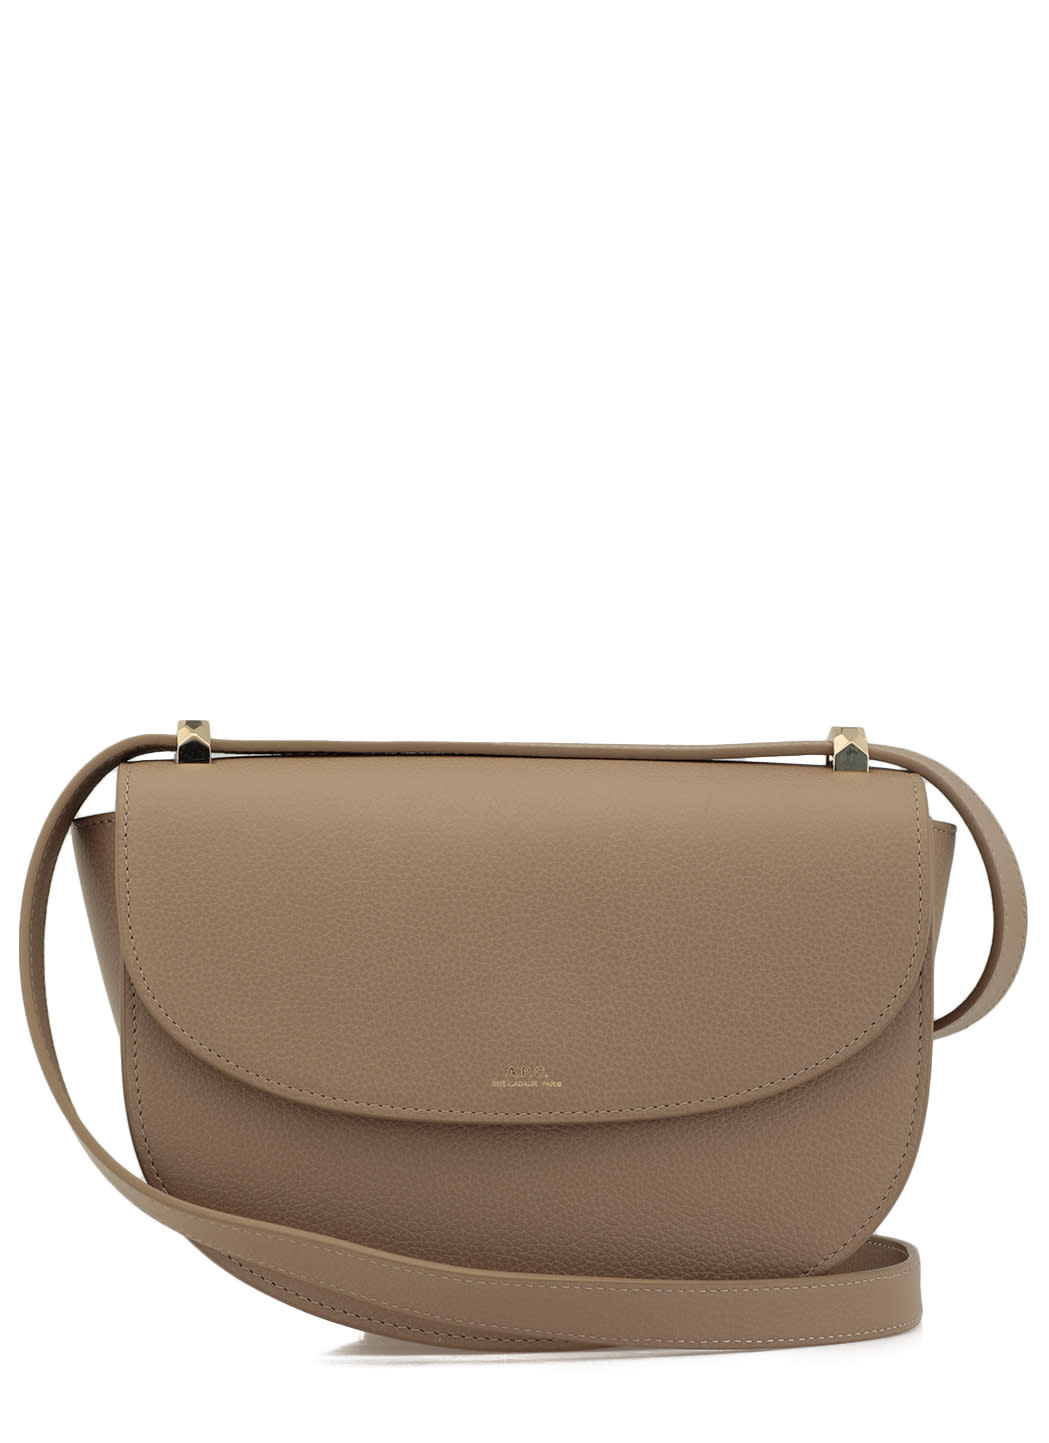 Apc Leather Shoulder Bag In Chataigne